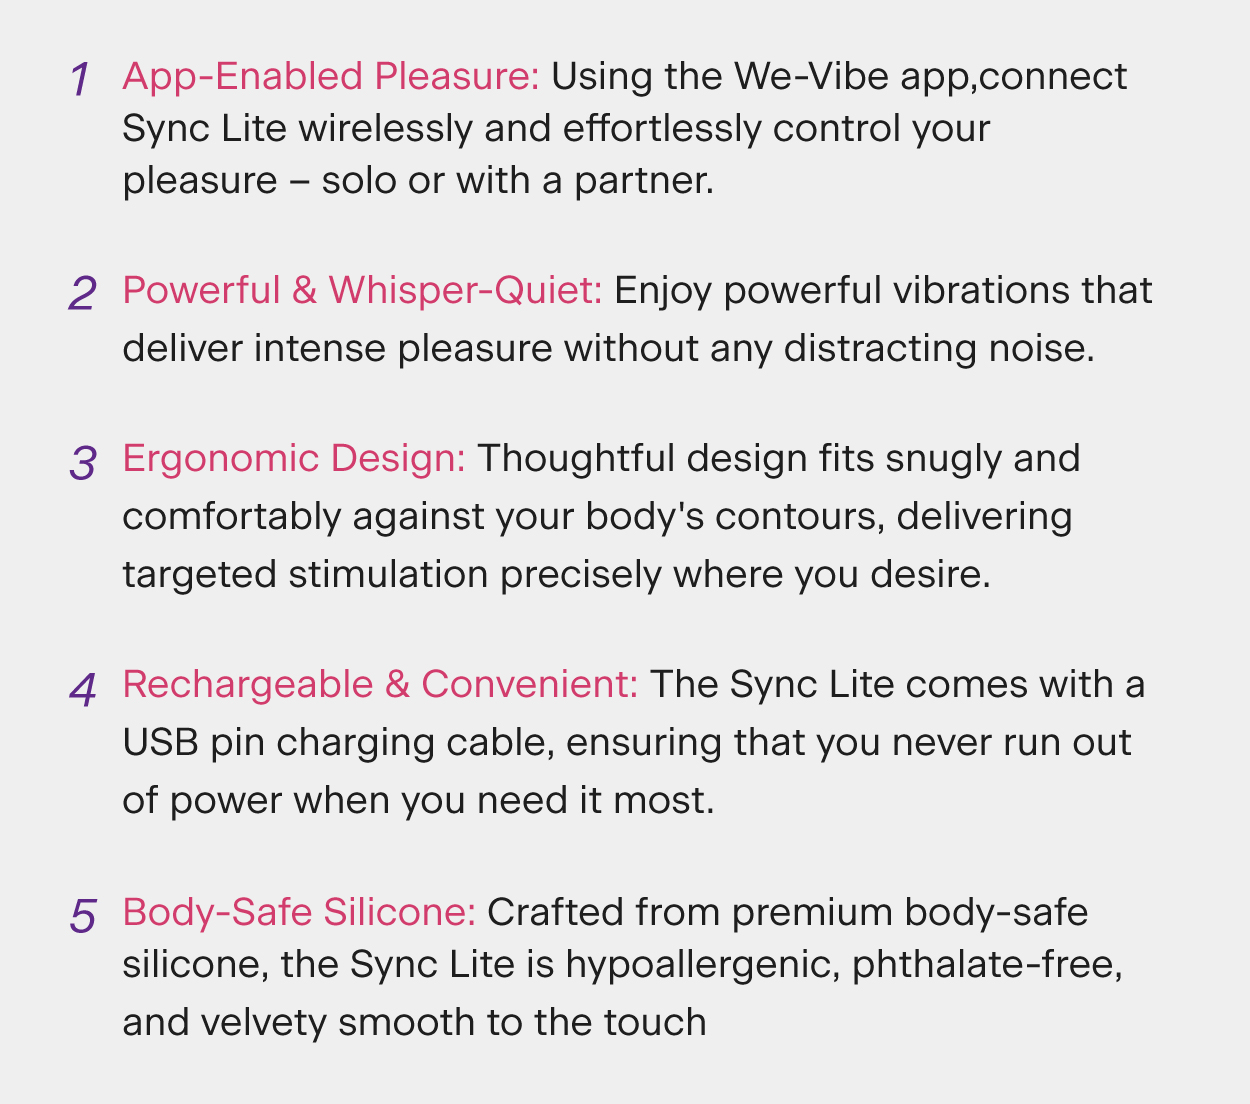 App-Enabled Pleasure: Using the We-Vibe app, connect Sync Lite wirelessly and effortlessly control your pleasure – solo or with a partner.
Powerful & Whisper-Quiet: Enjoy powerful vibrations that deliver intense pleasure without any distracting noise.
Body-Safe Silicone: Crafted from premium body-safe silicone, the Sync Lite is hypoallergenic, phthalate-free, and velvety smooth to the touch. 
Ergonomic Design: Thoughtful design fits snugly and comfortably against your body's contours, delivering targeted stimulation precisely where you desire.
Rechargeable & Convenient: The Sync Lite comes with a USB pin charging cable, ensuring that you never run out of power when you need it most.